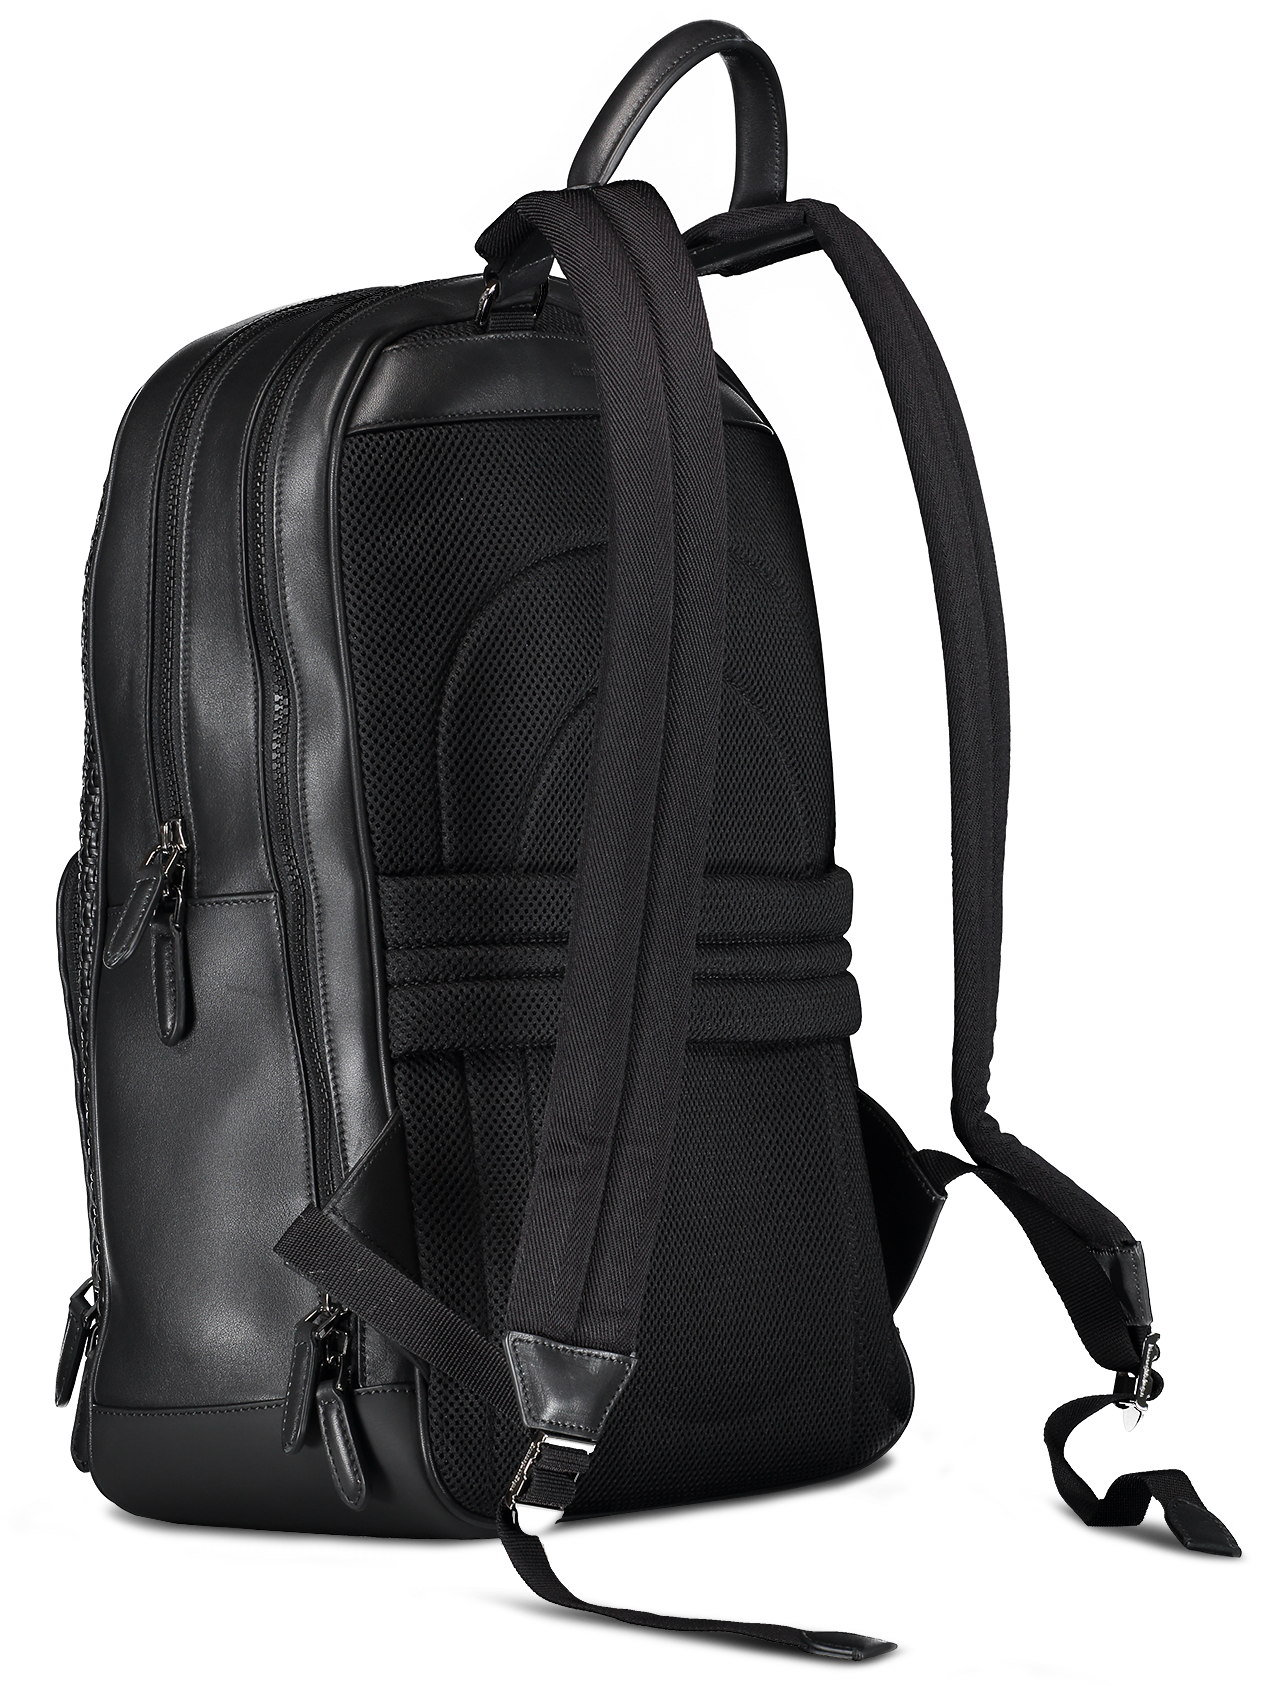 Business Backpack PNG Pic